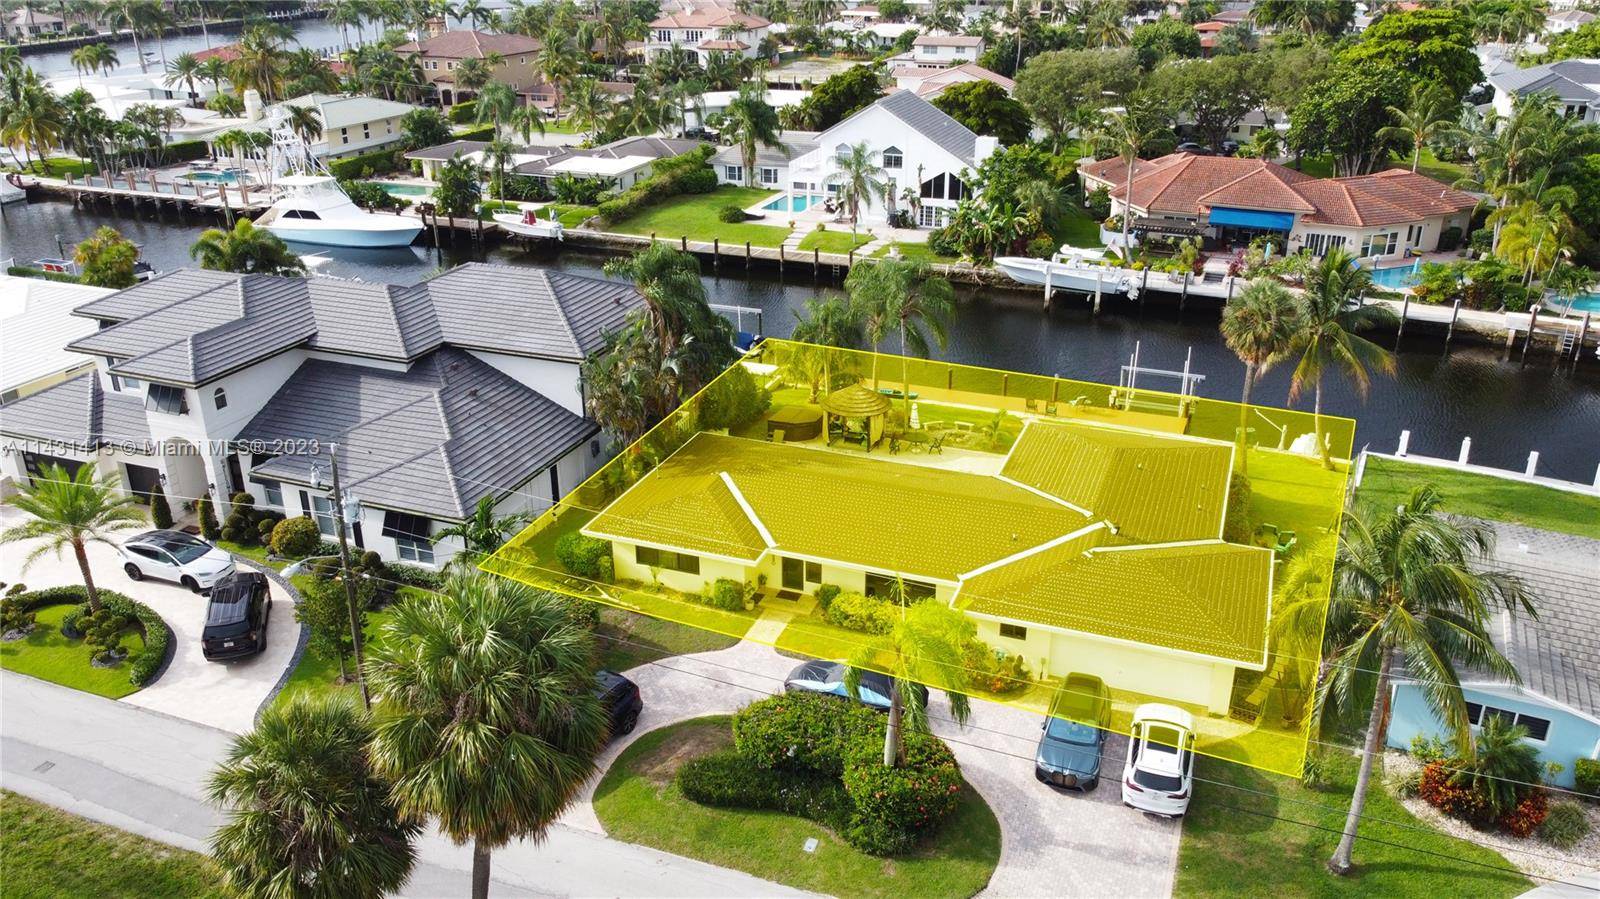 Welcome to this exceptional waterfront home in Pompano Beach, ideally situated in the sought after Hillsboro Harbor area.